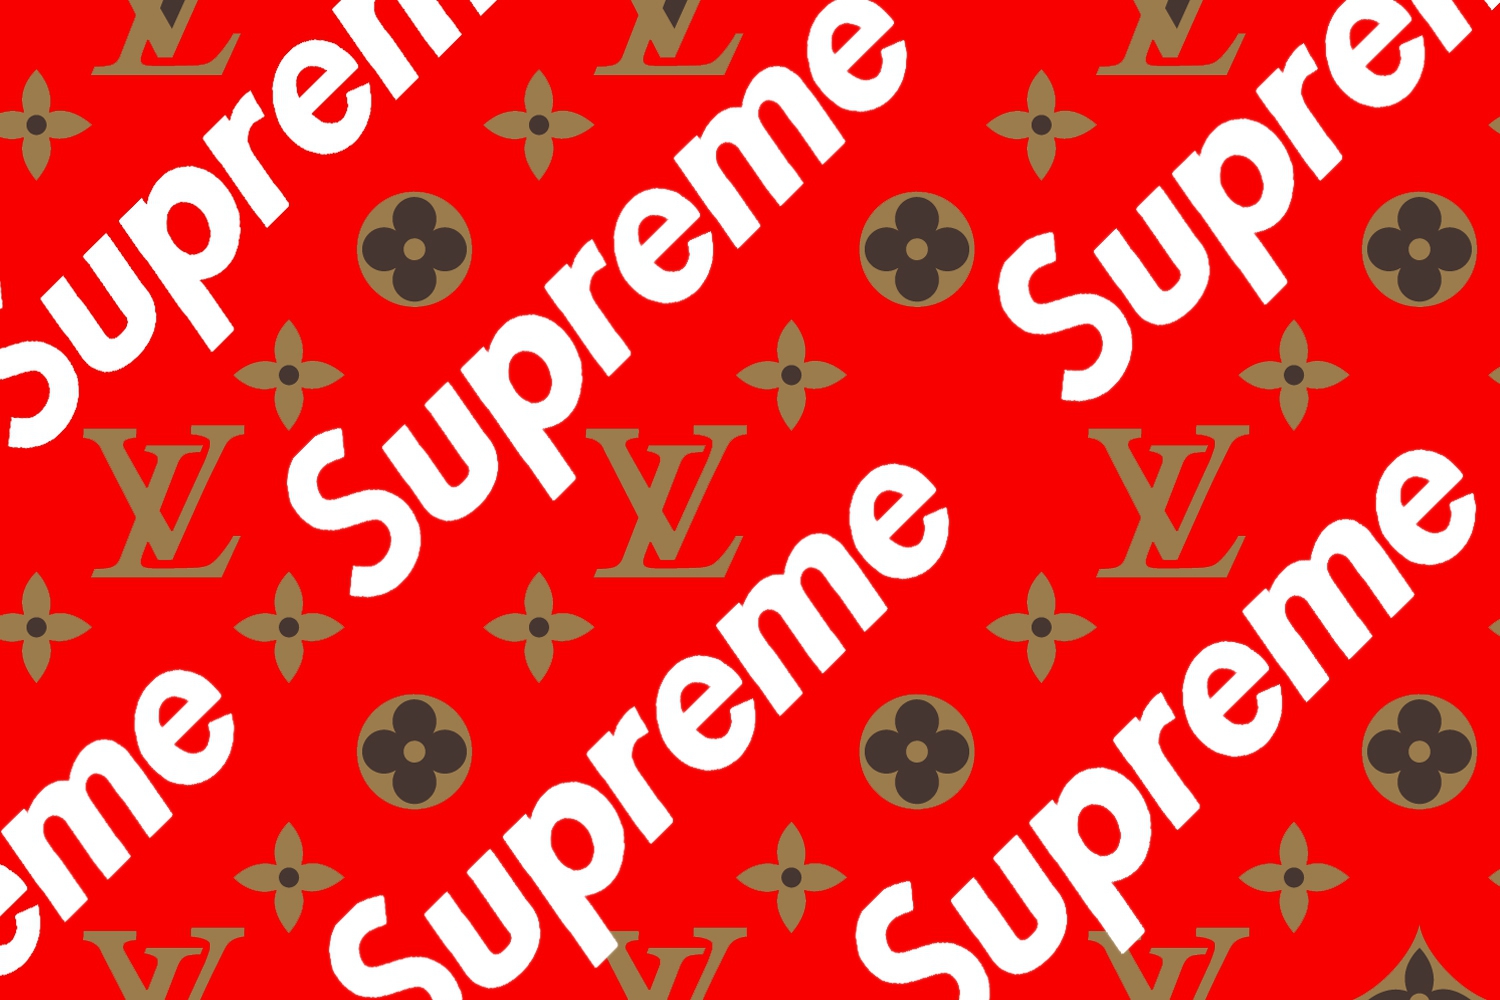 Are You Ready For Today Collaboration Between Supreme And Louis